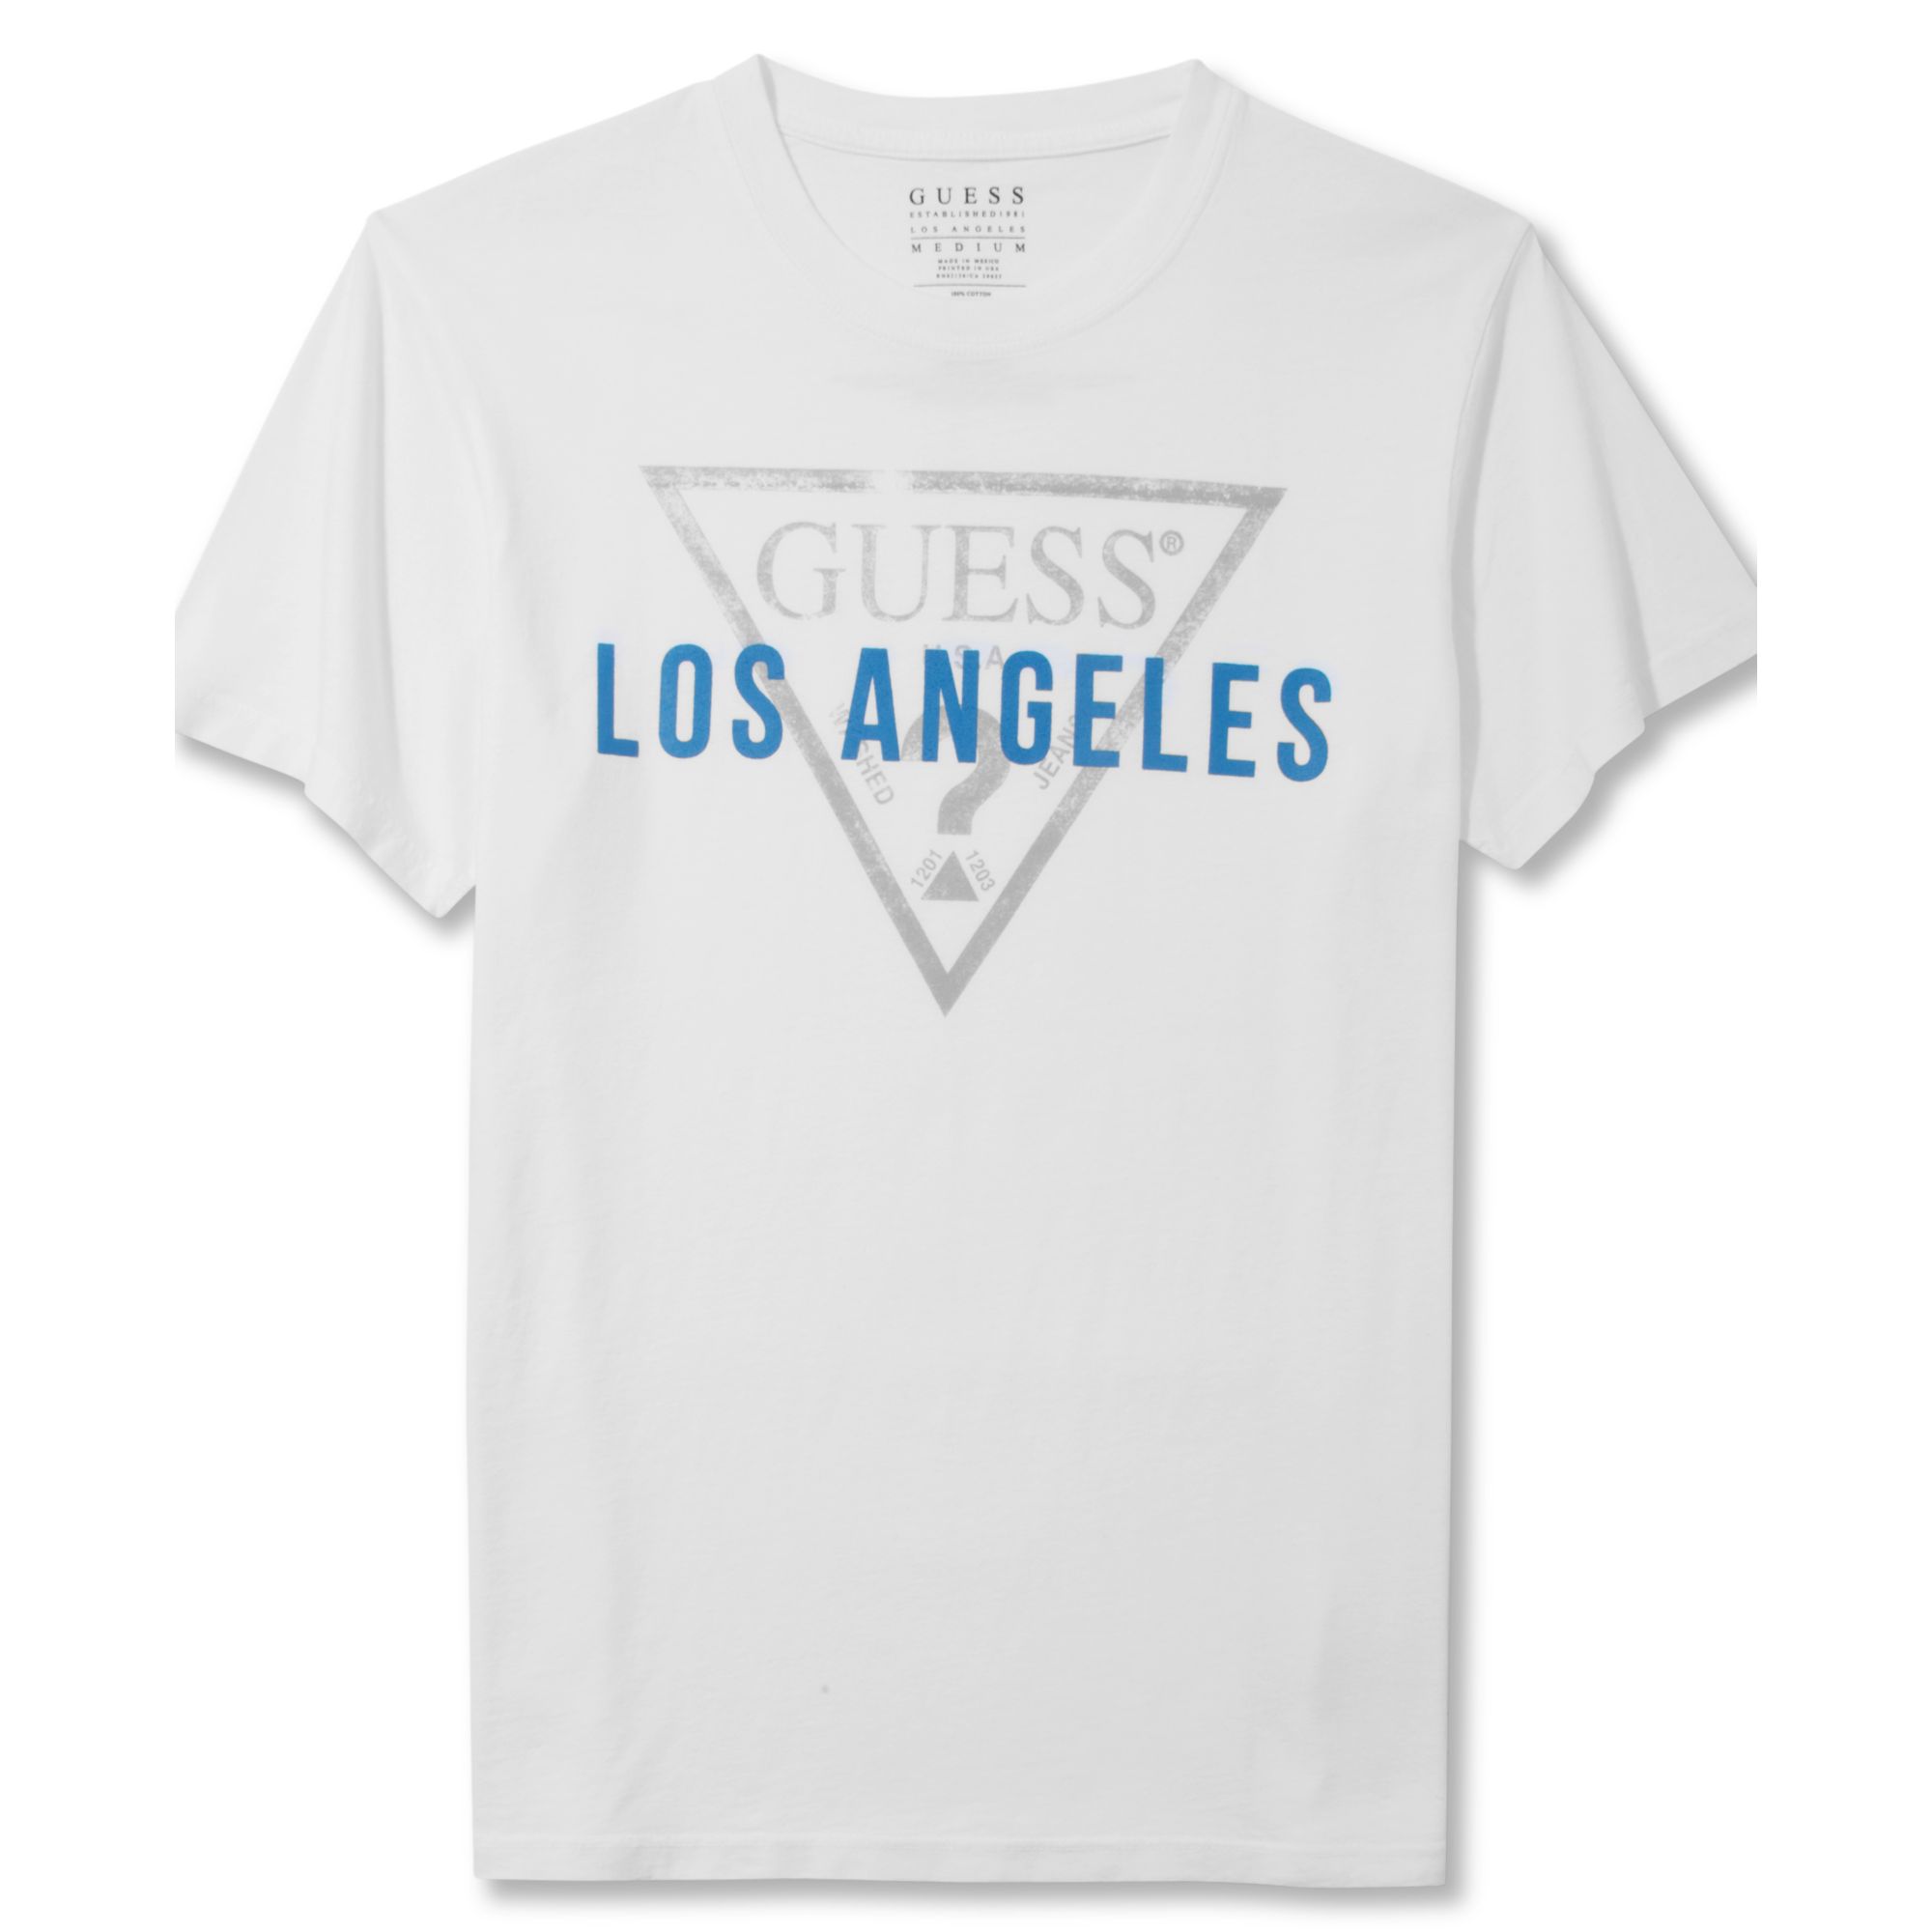 Pay guess los angeles white t shirt for